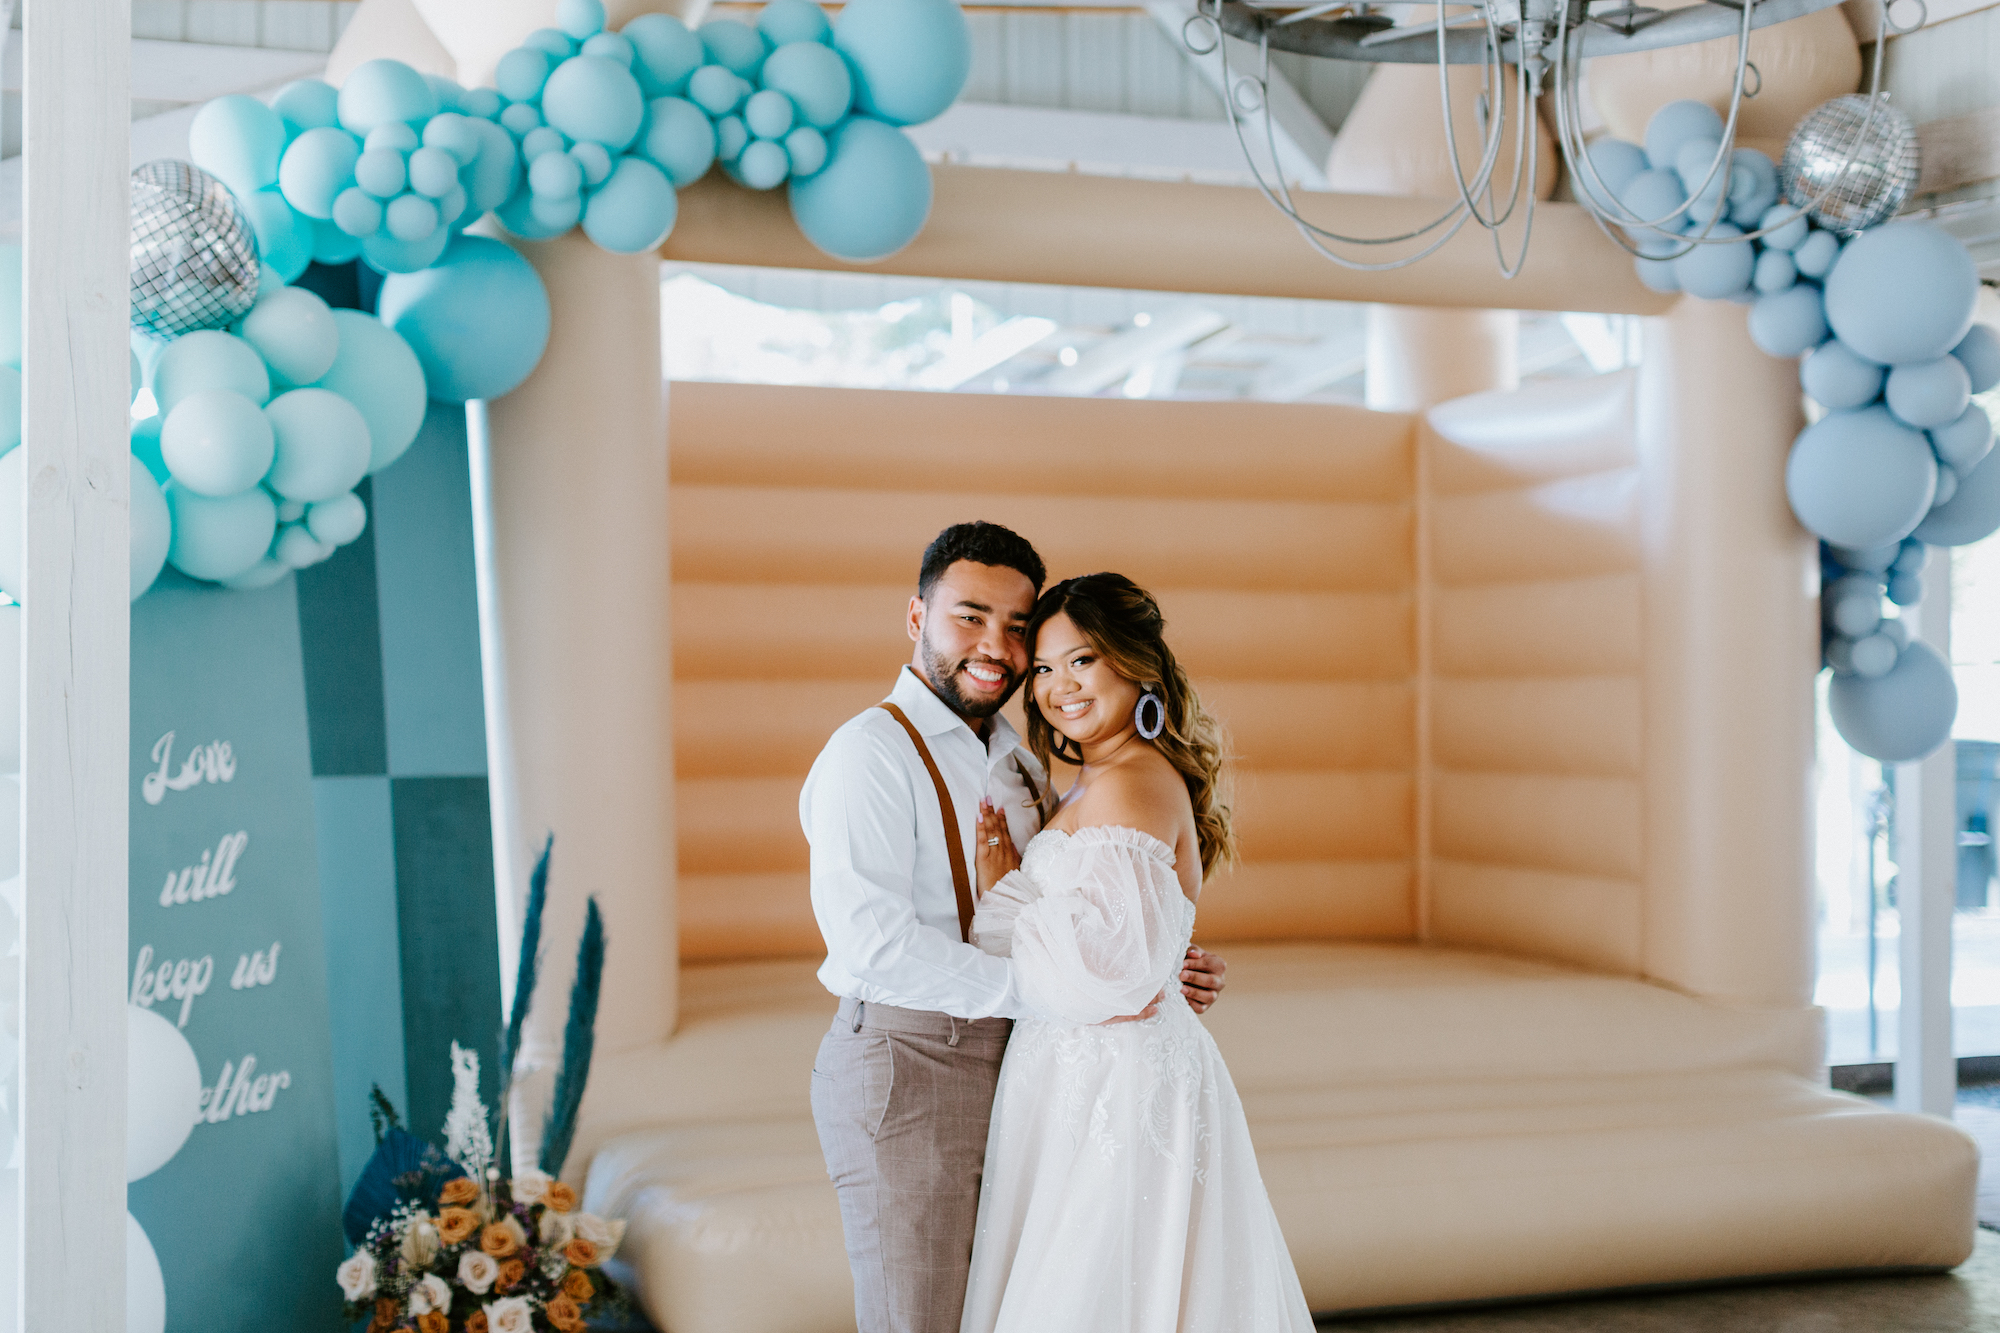 This Summer Wedding Inspiration Includes Disco Balls, Balloons, and a Bounce House